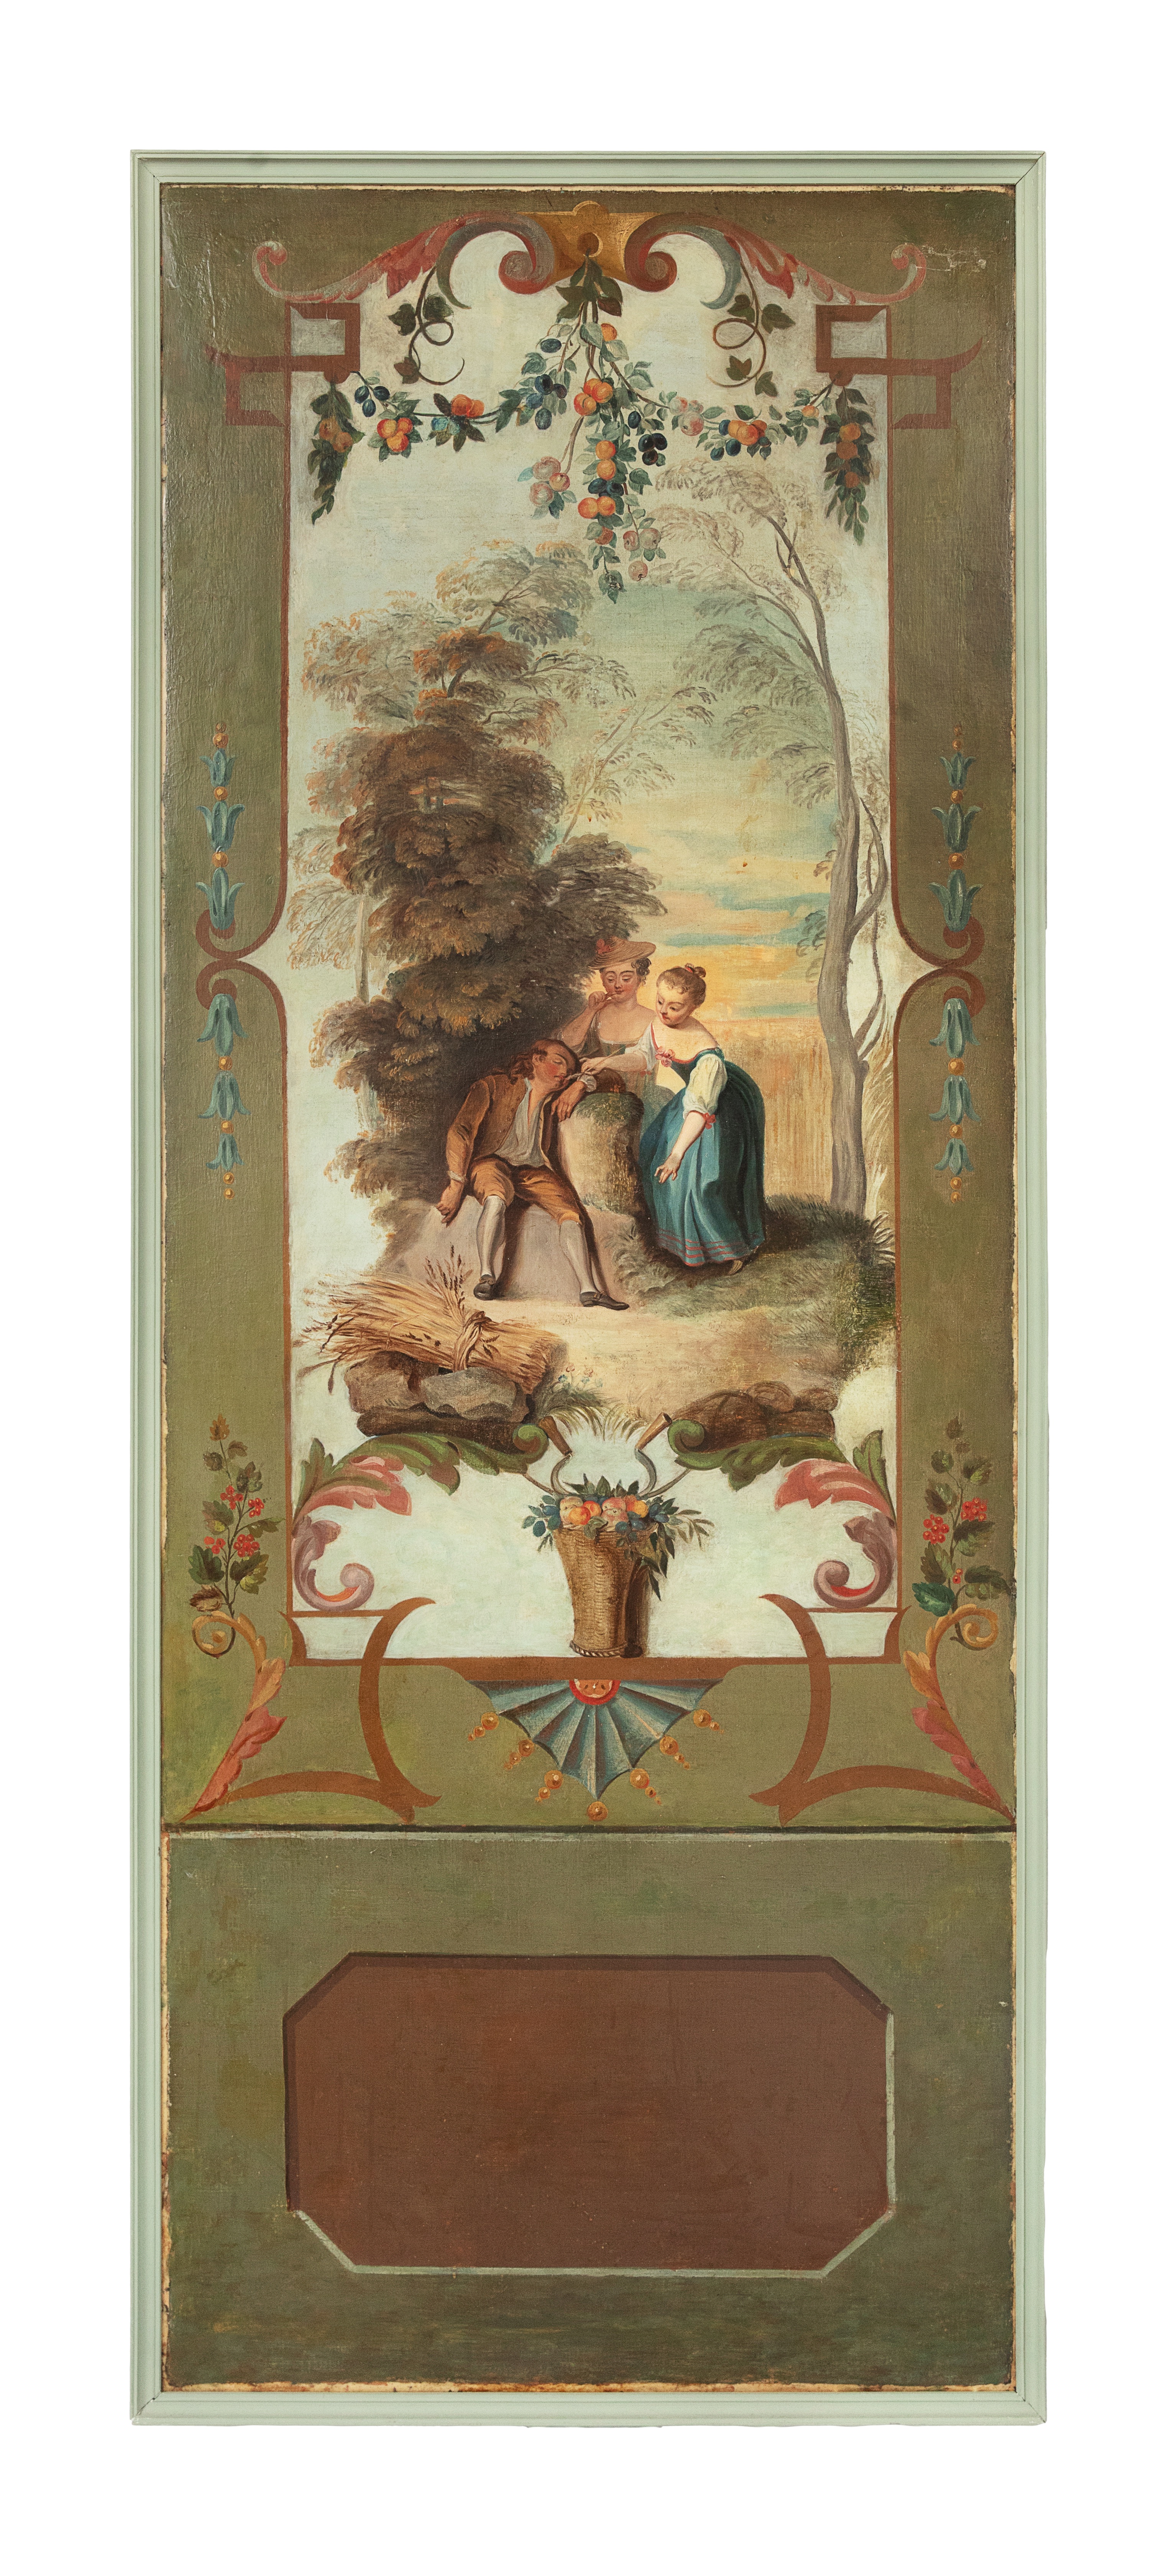 French, 18th Century, The Seasons, A set of four decorative wall panels - Image 4 of 4